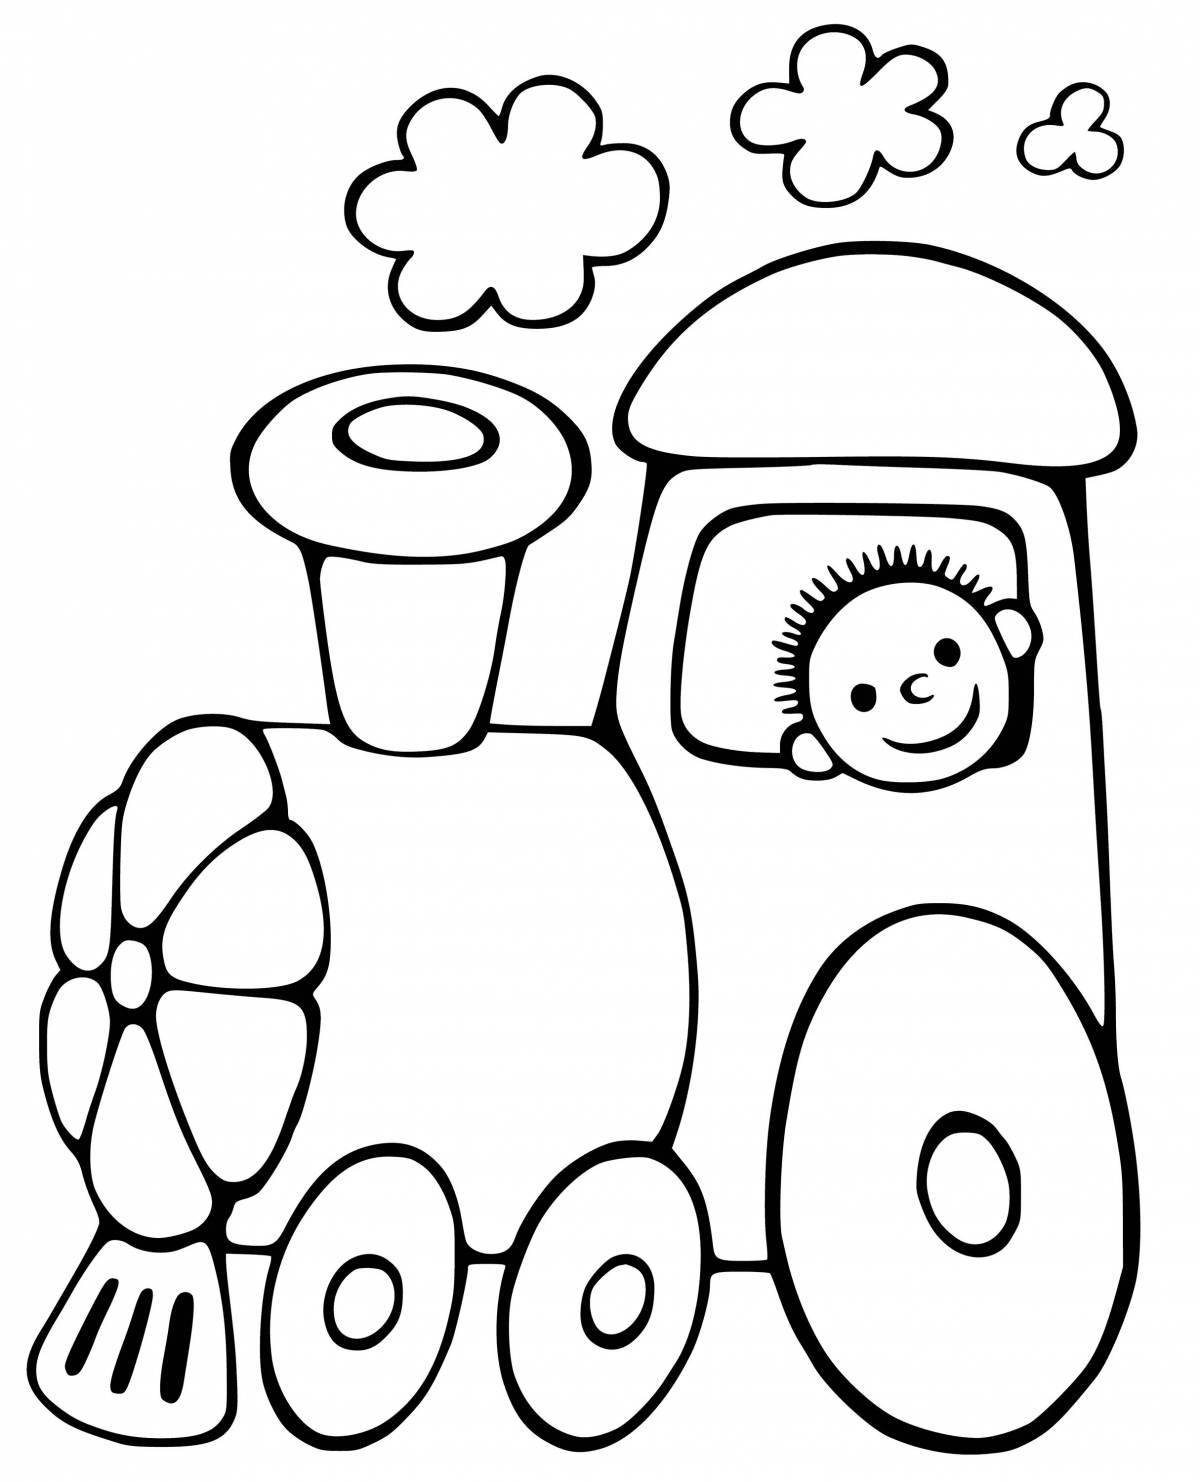 Colorful coloring template for kindergarten